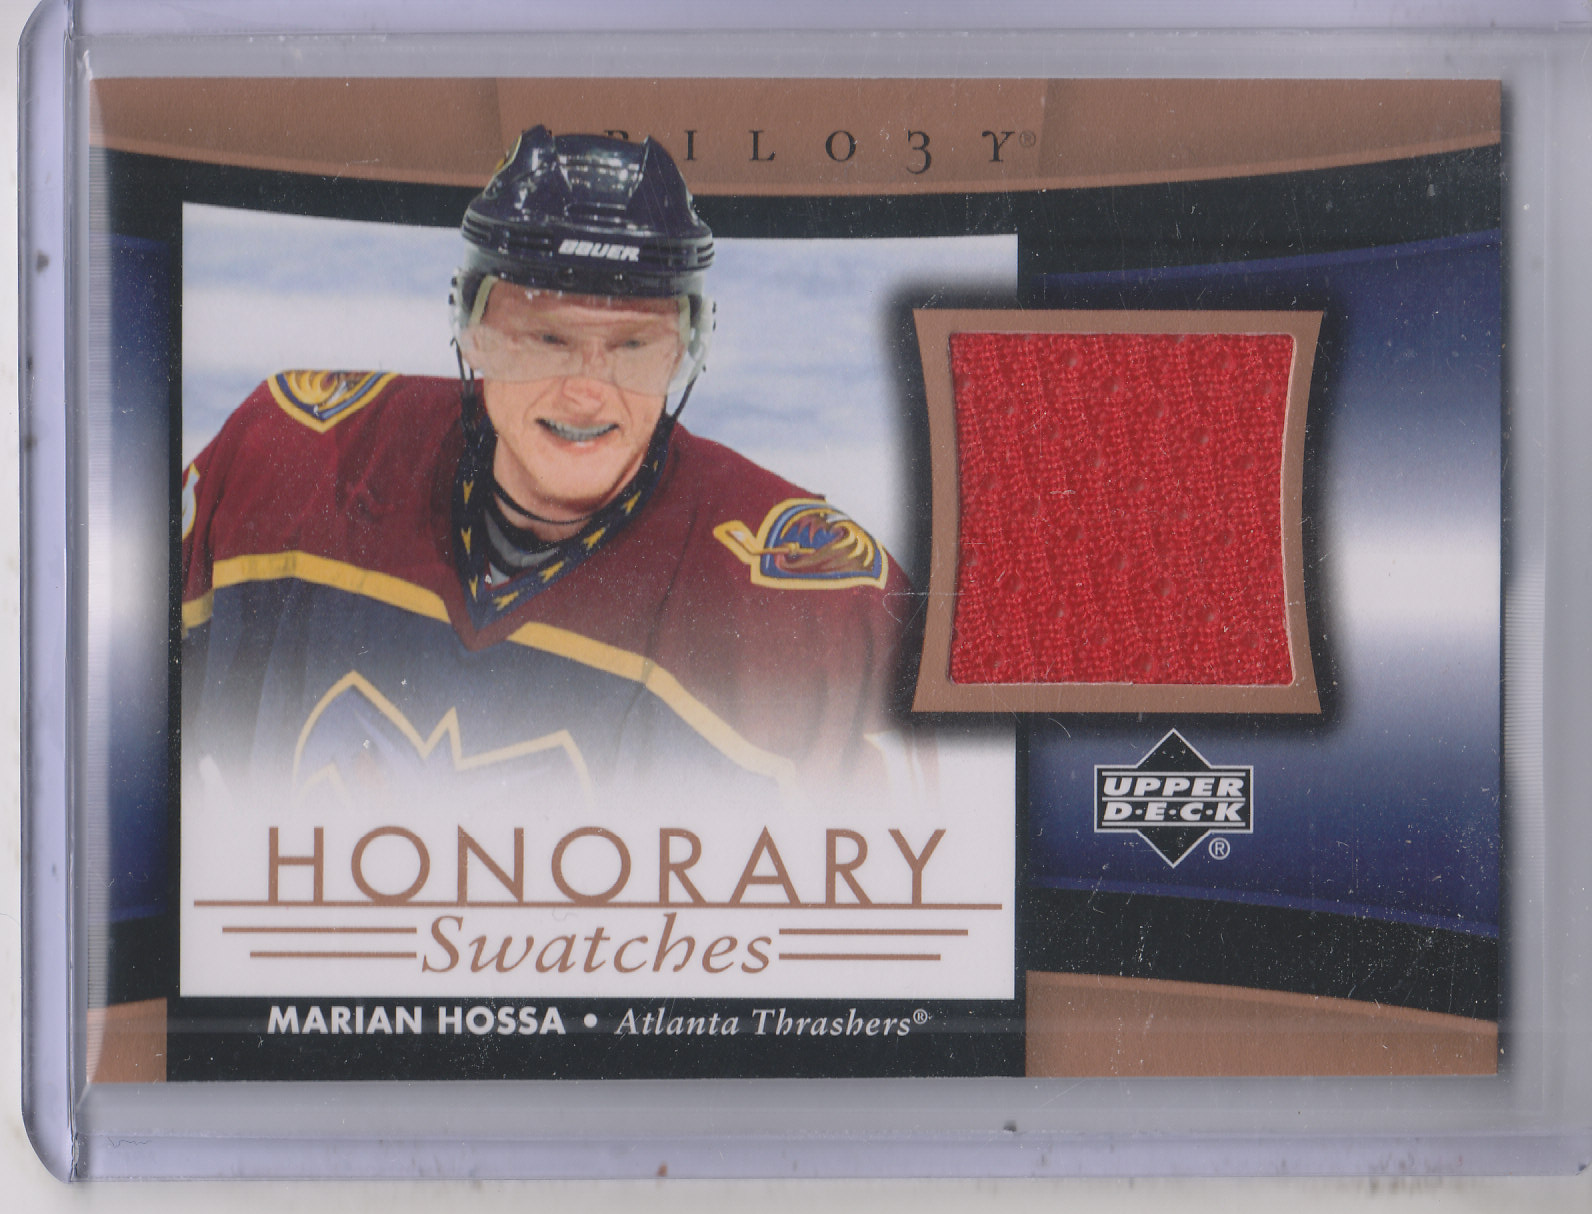 2005-06 Upper Deck Trilogy Honorary Swatches #HSHO Marian Hossa